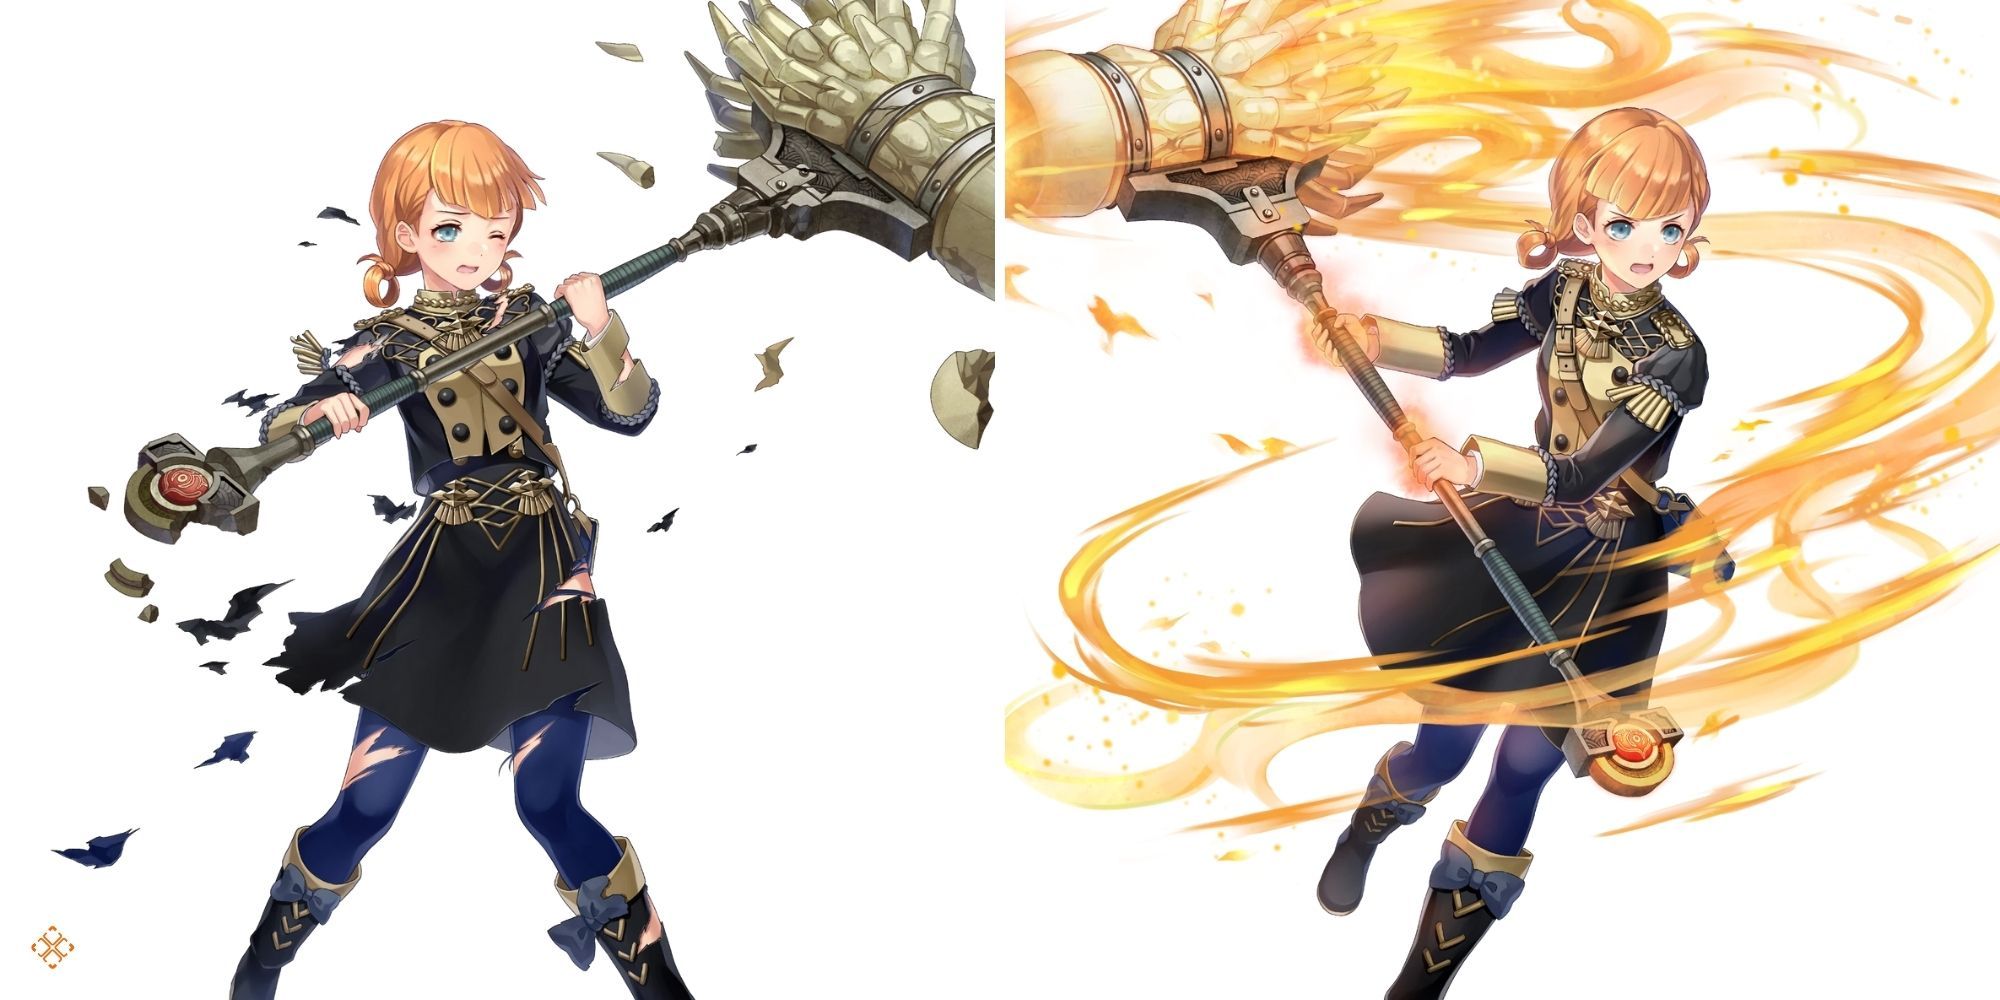 Fire Emblem Three Houses - Annette holding Crusher in official art on both sides